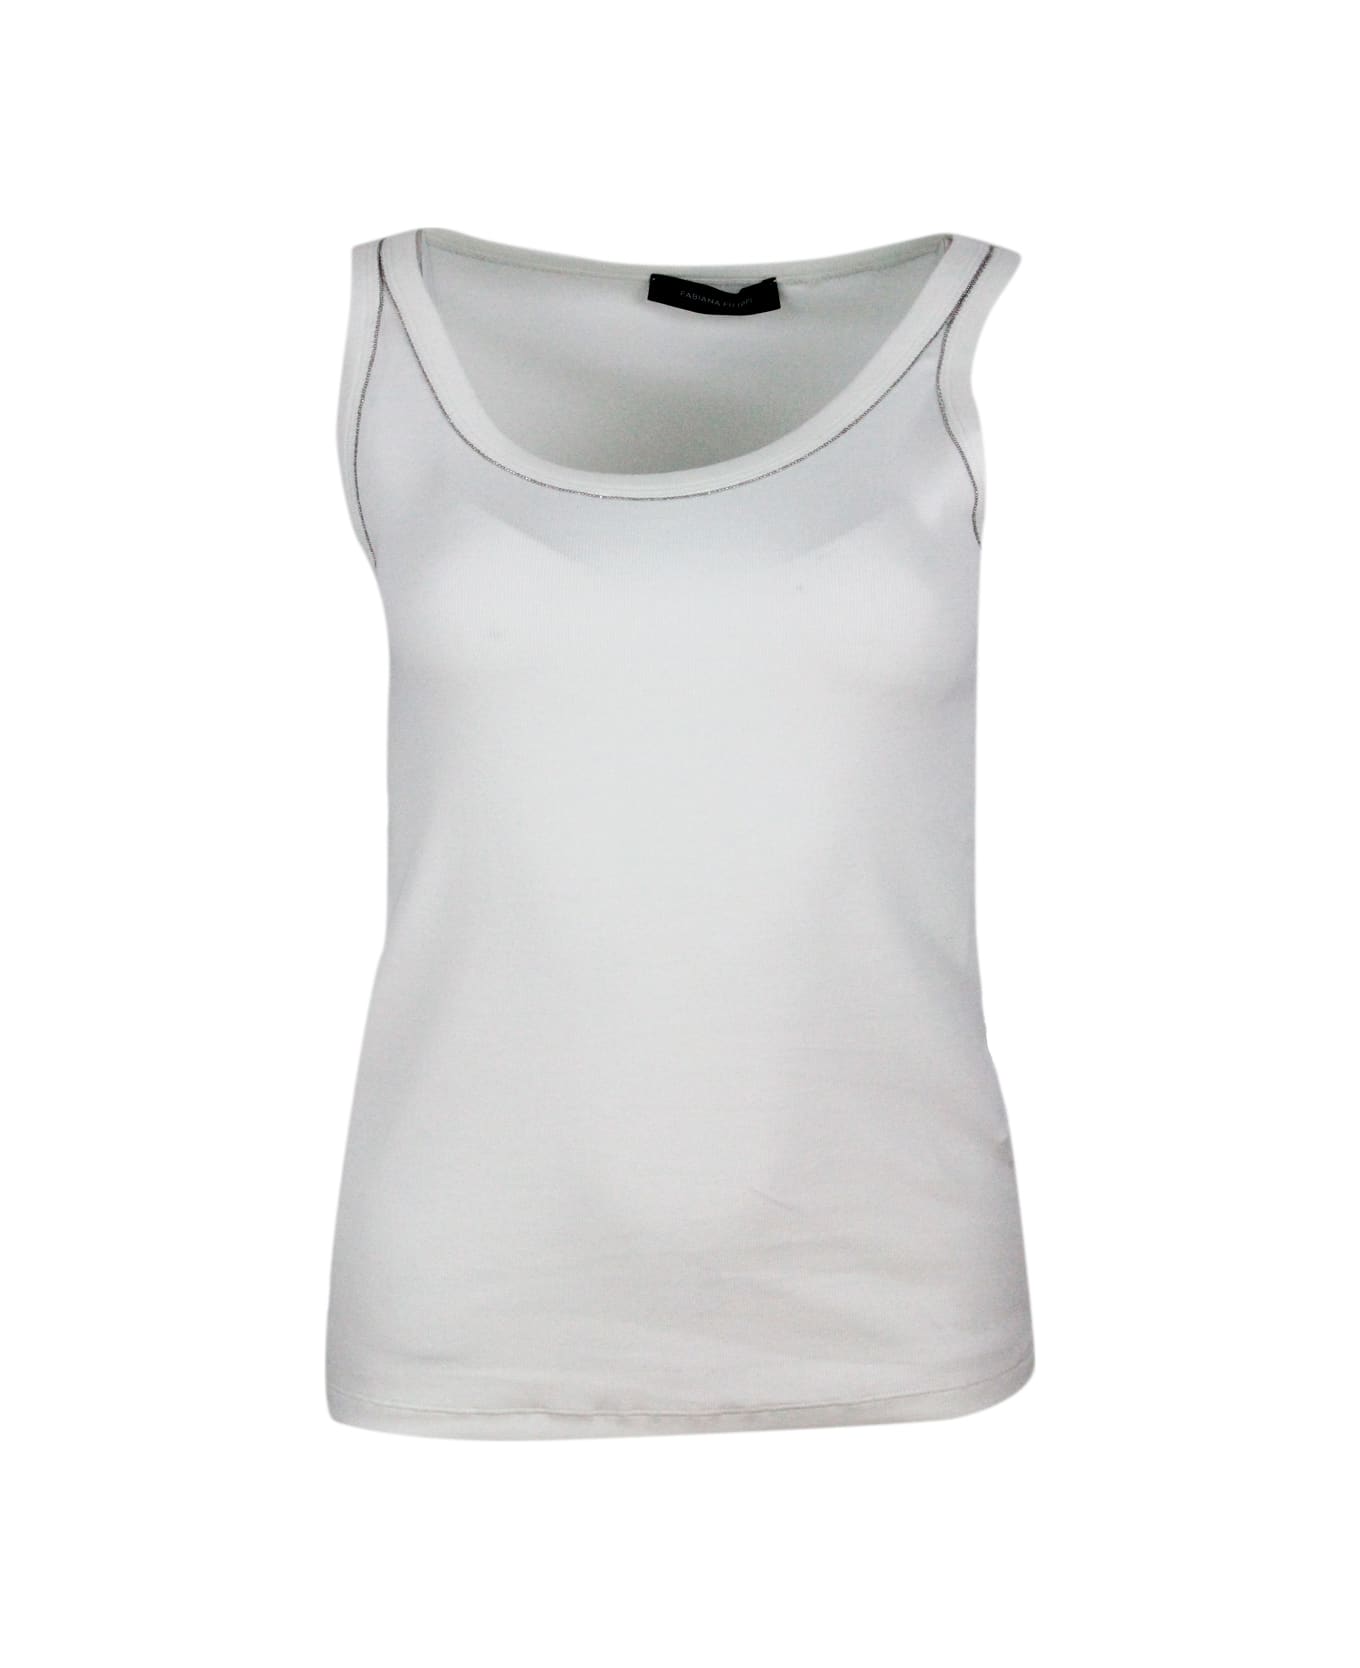 Fabiana Filippi Sleeveless T-shirt, Ribbed Cotton Tank Top With U-neck, Elbow-length Sleeves Embellished With Rows Of Monili On The Neck And Sides - White タンクトップ